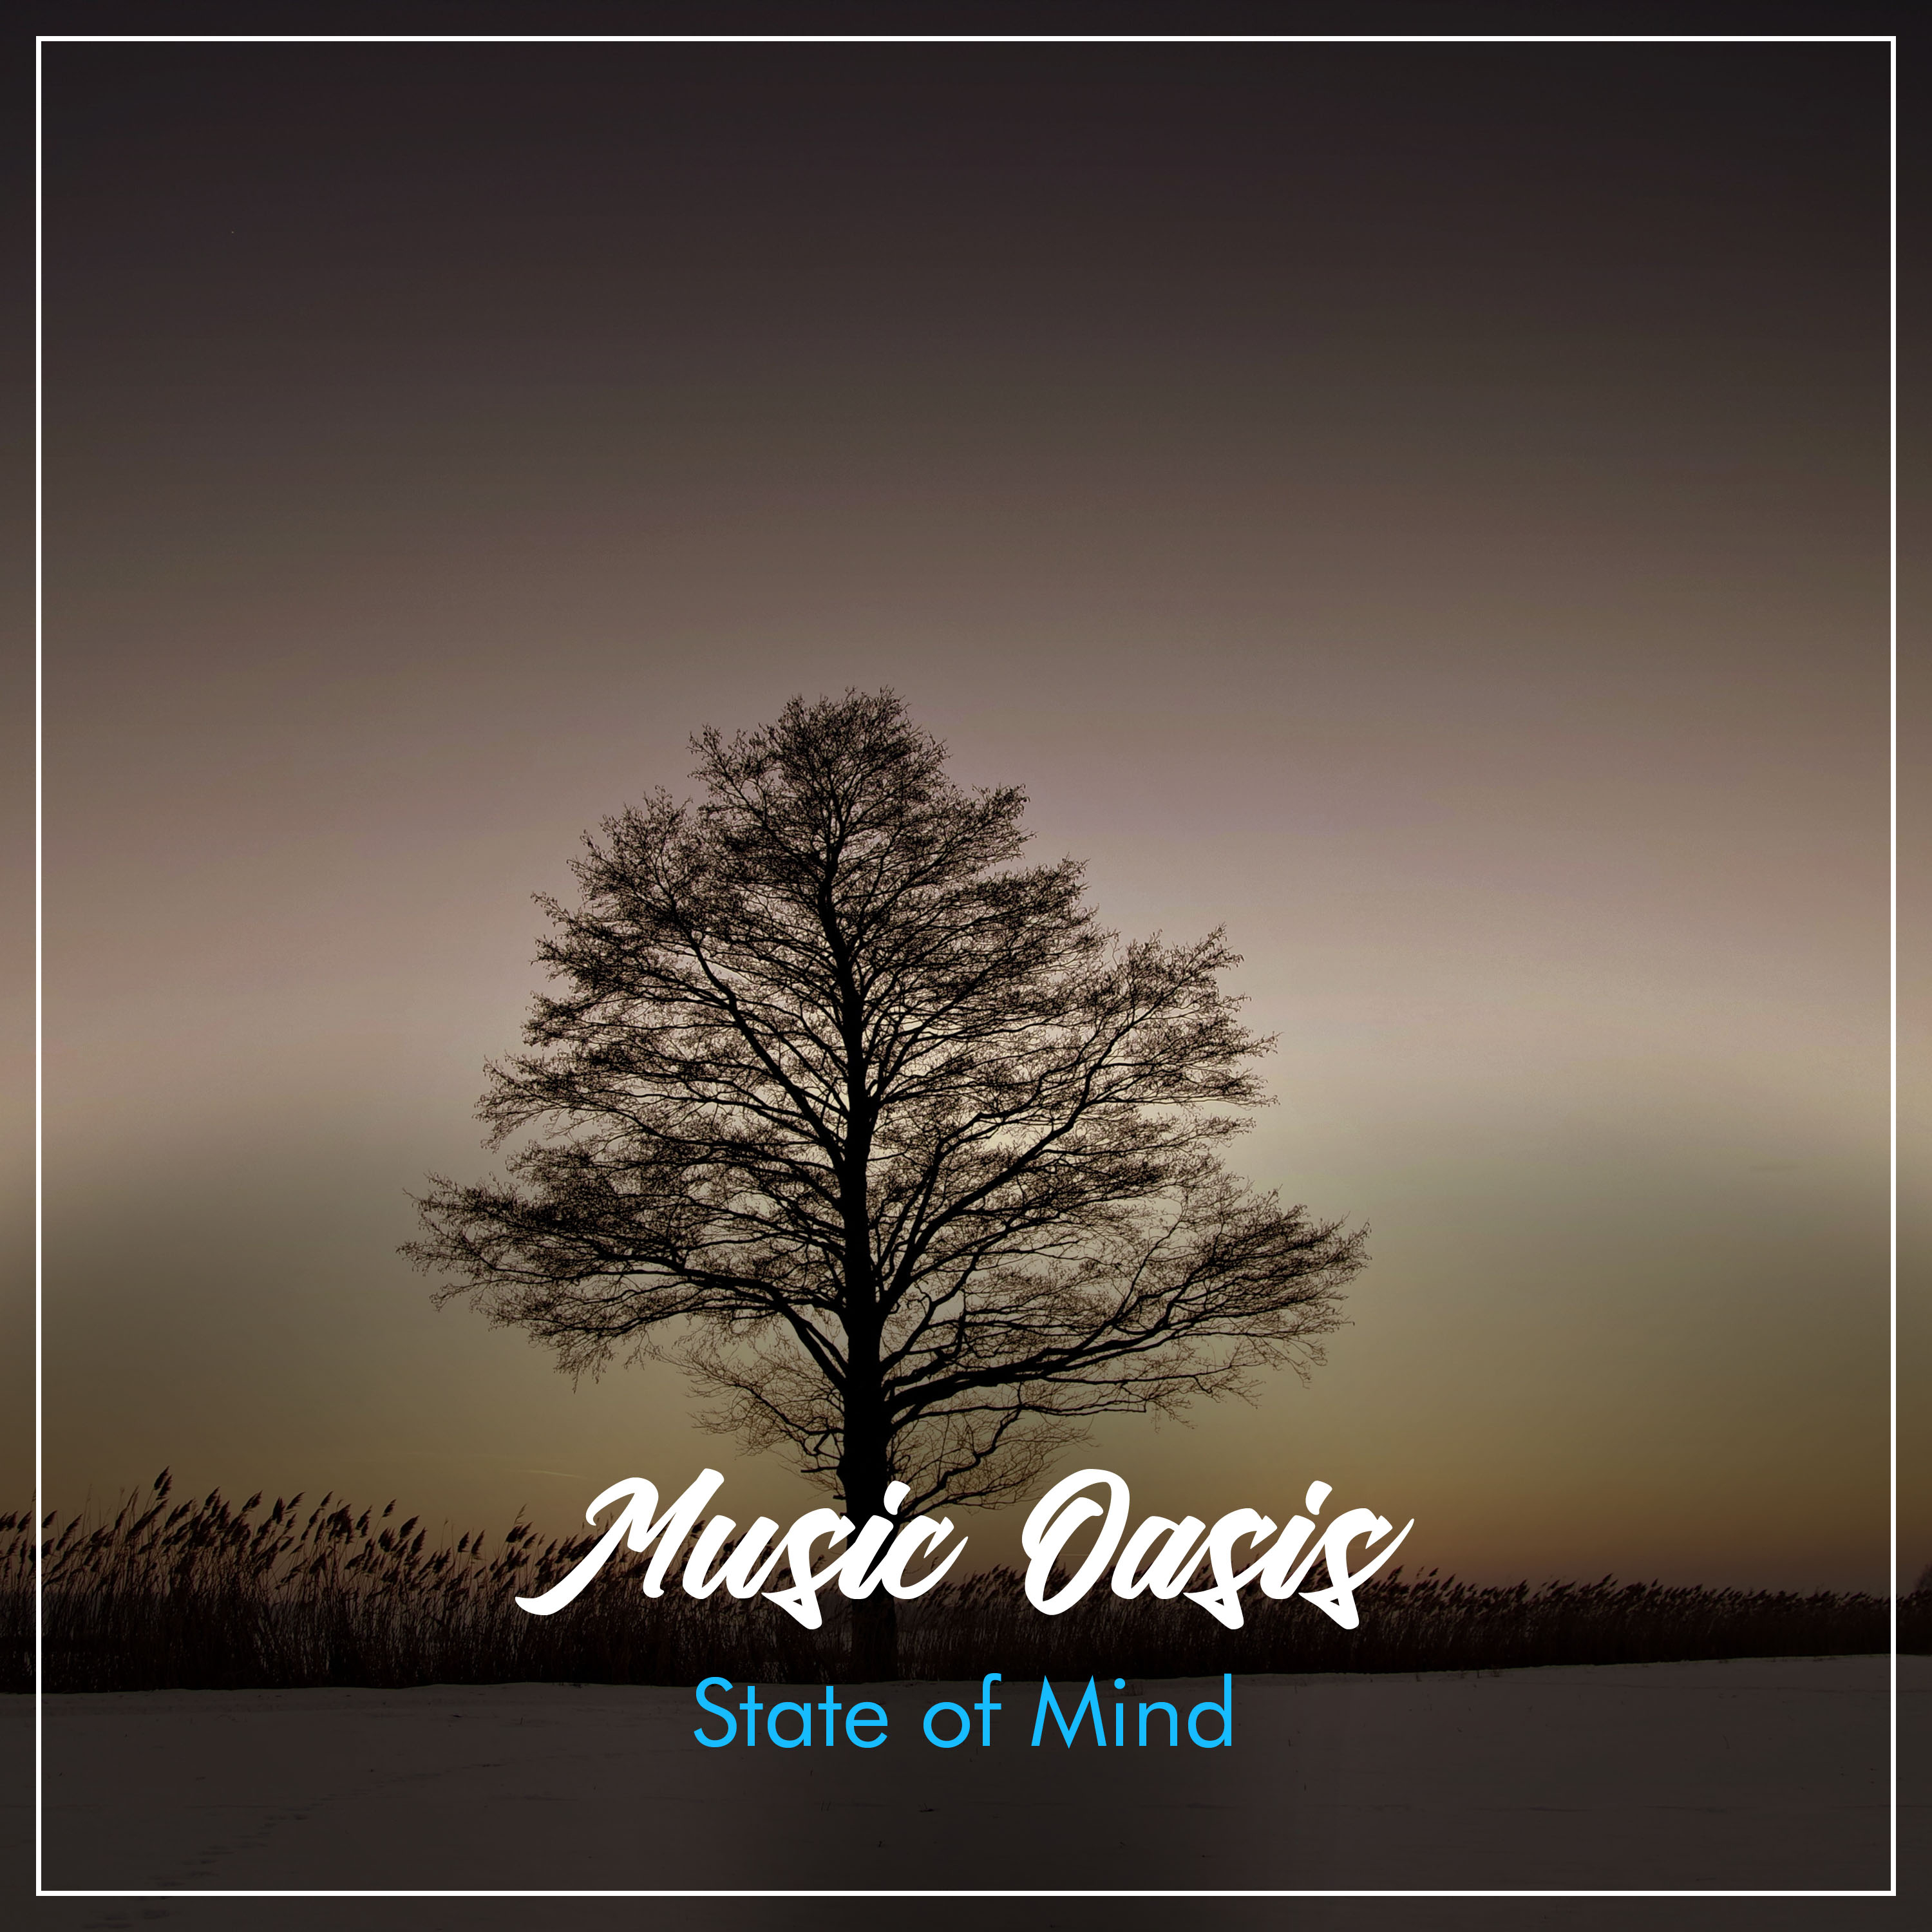 2018 A Music Oasis Compilation - State of Mind